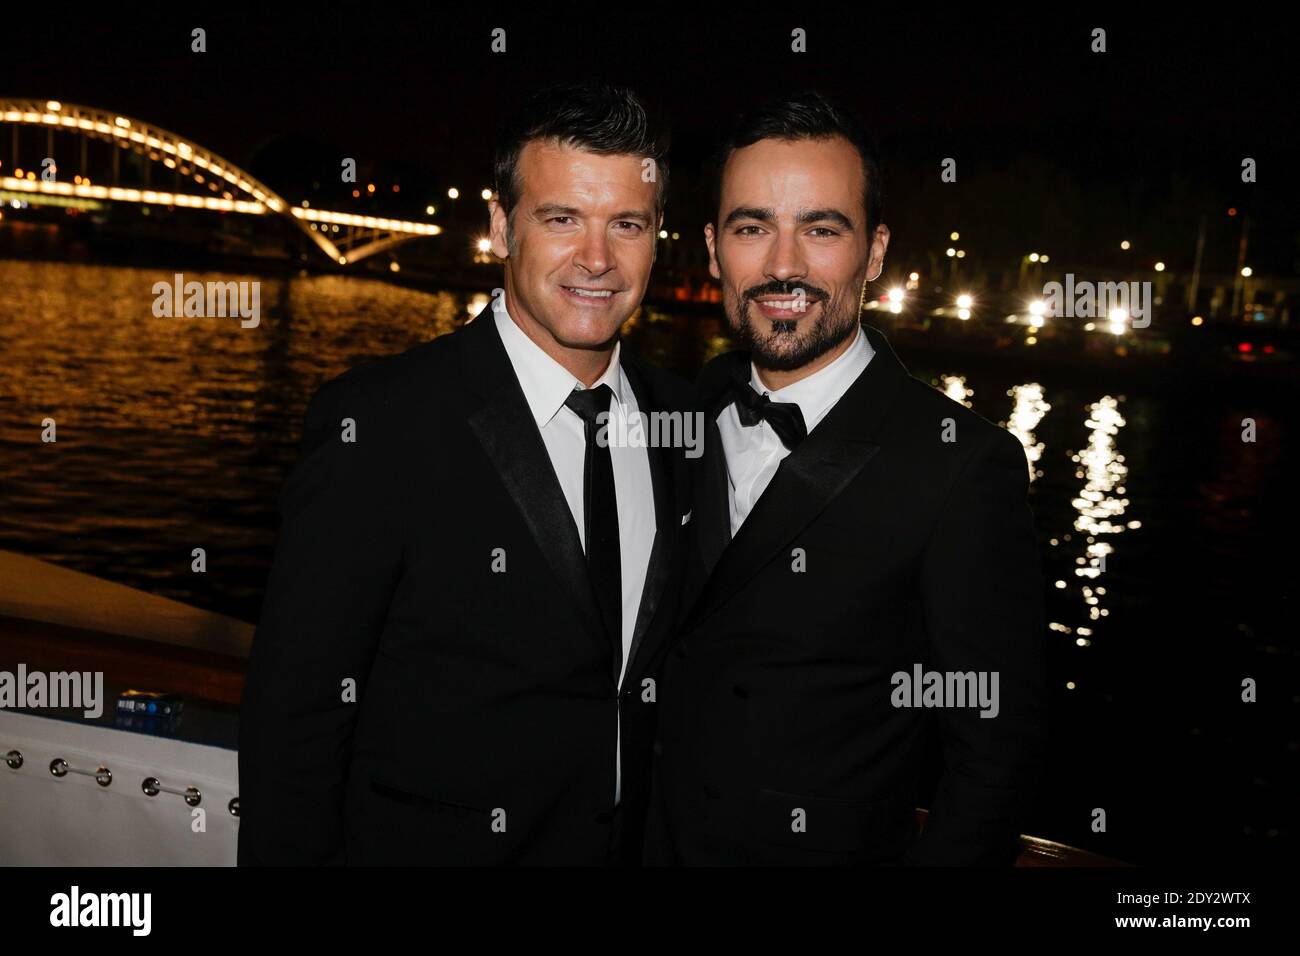 Damien Sargue and Roch Voisine attending Forever Gentlemen 2 party to celebrate new album, in Paris, France on October 1, 2014. Photo by Jerome Domine/ABACAPRESS.COM Stock Photo